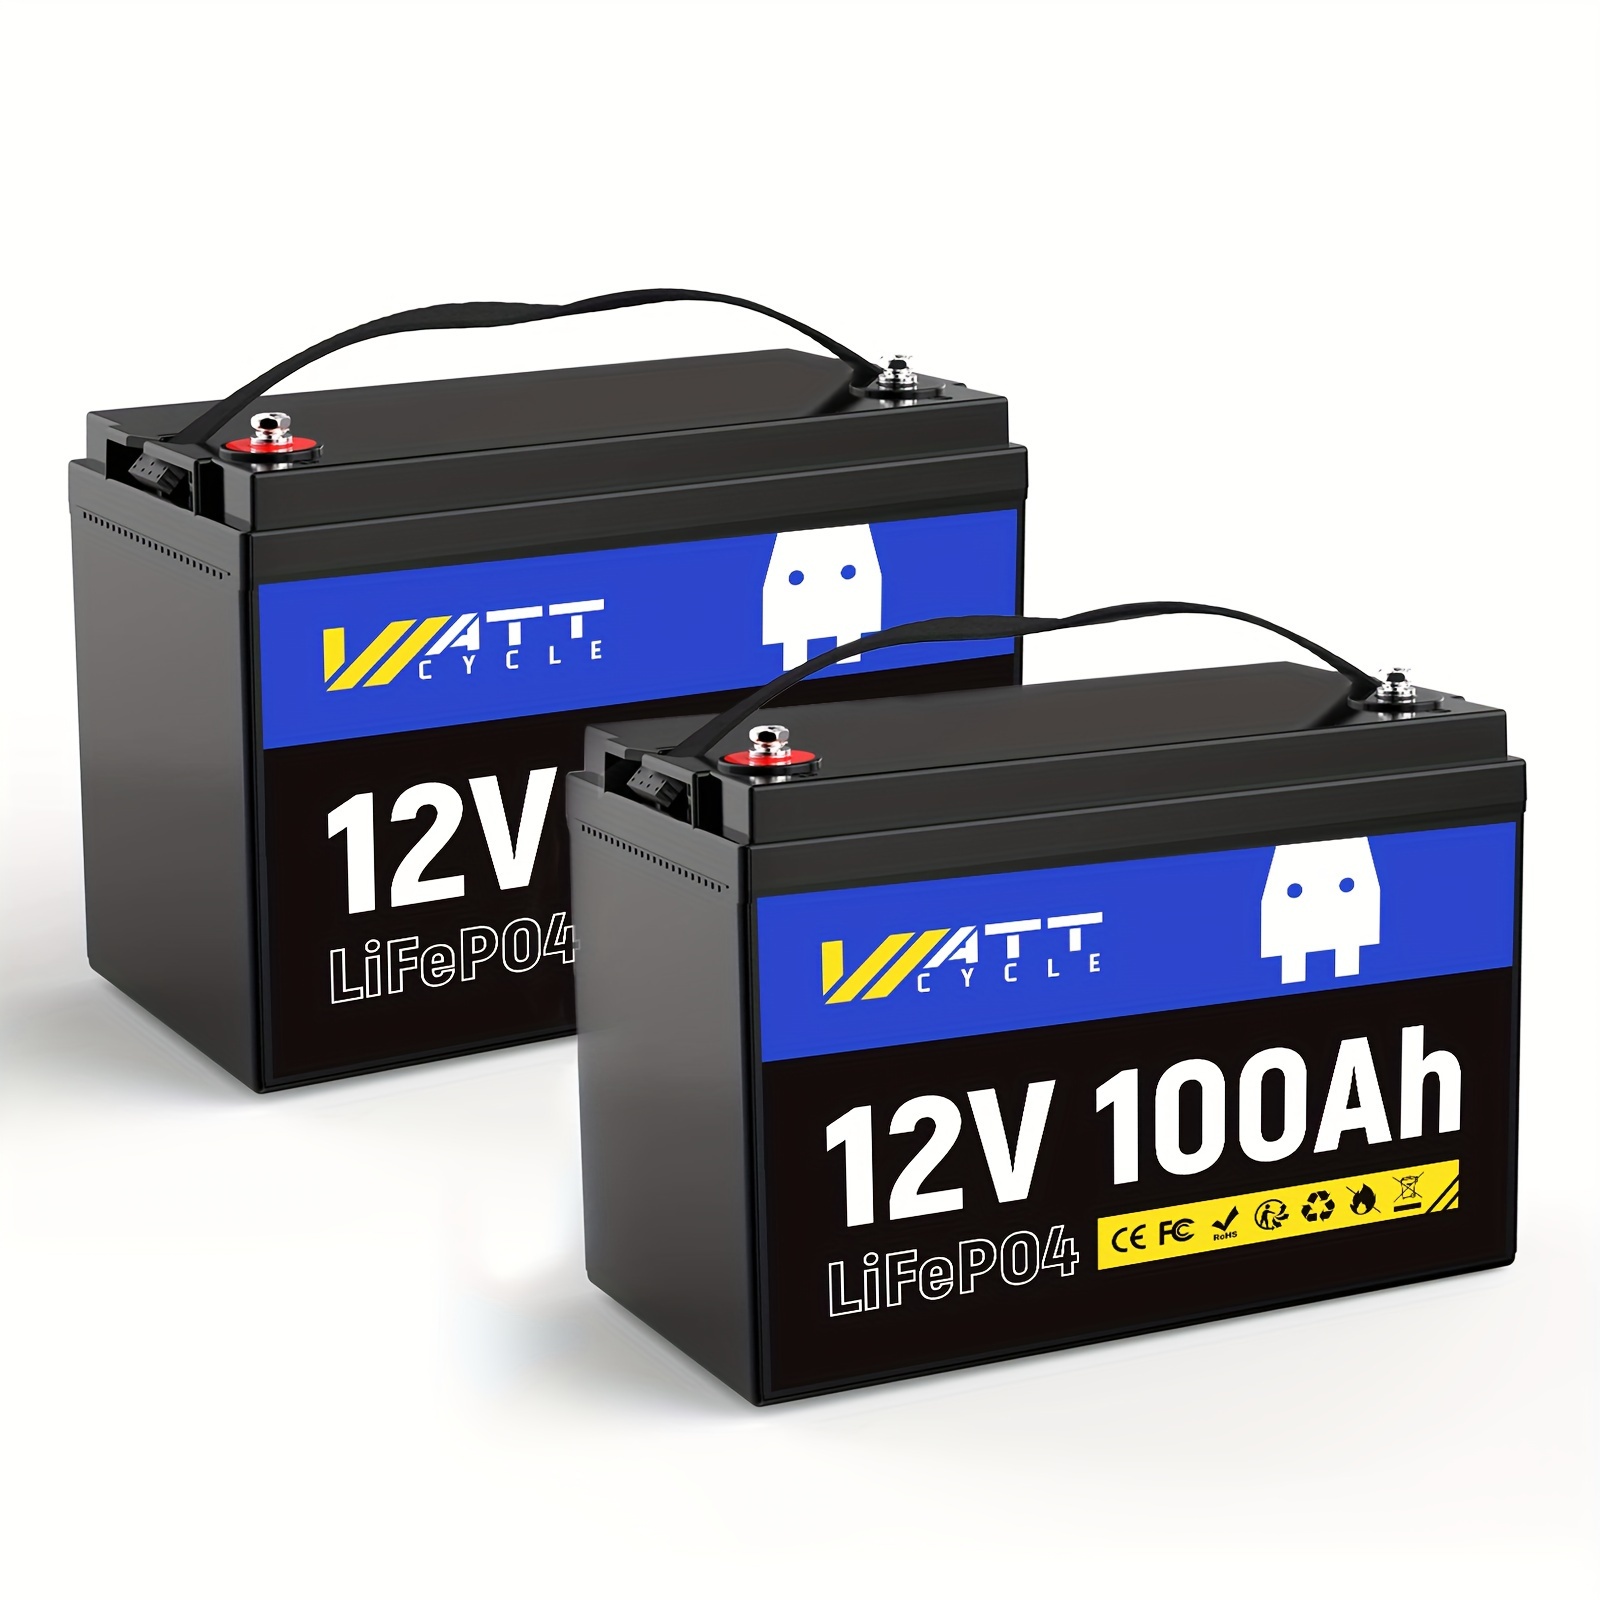 

24v 100ah Lifepo4 Battery Pack - Dual Pack, Series Or Parallel Connection, 20000 Cycles, Built-in 100a Bms - Perfect For Rv, Outdoor Camping, And Home Energy Storage